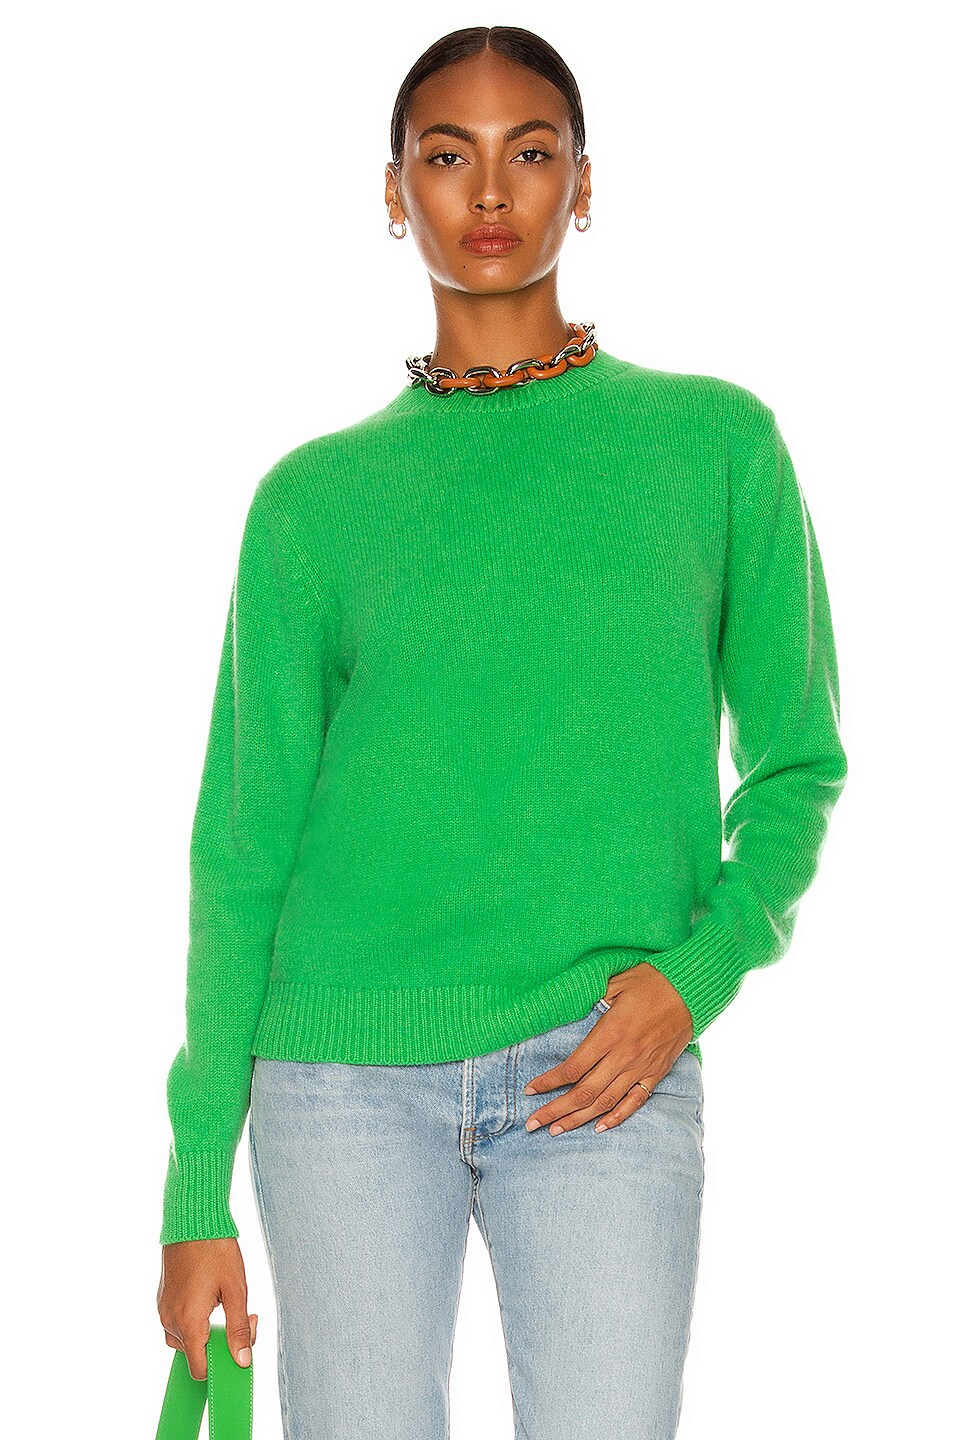 Image 1 of The Elder Statesman Cashmere Simple Crew Sweater in Gecko